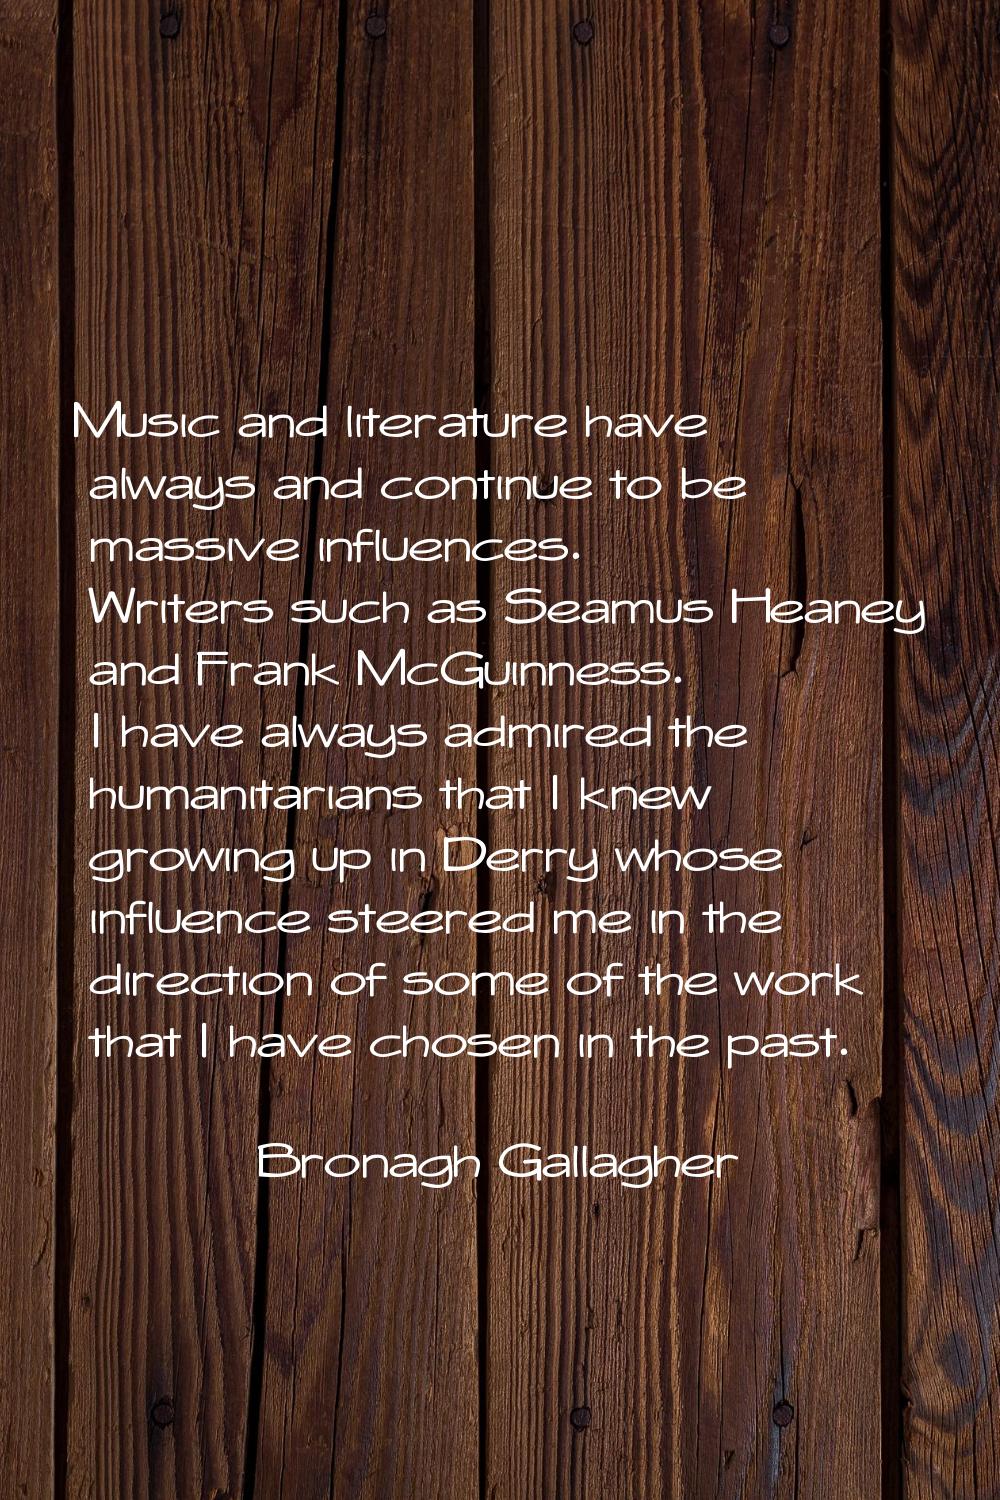 Music and literature have always and continue to be massive influences. Writers such as Seamus Hean